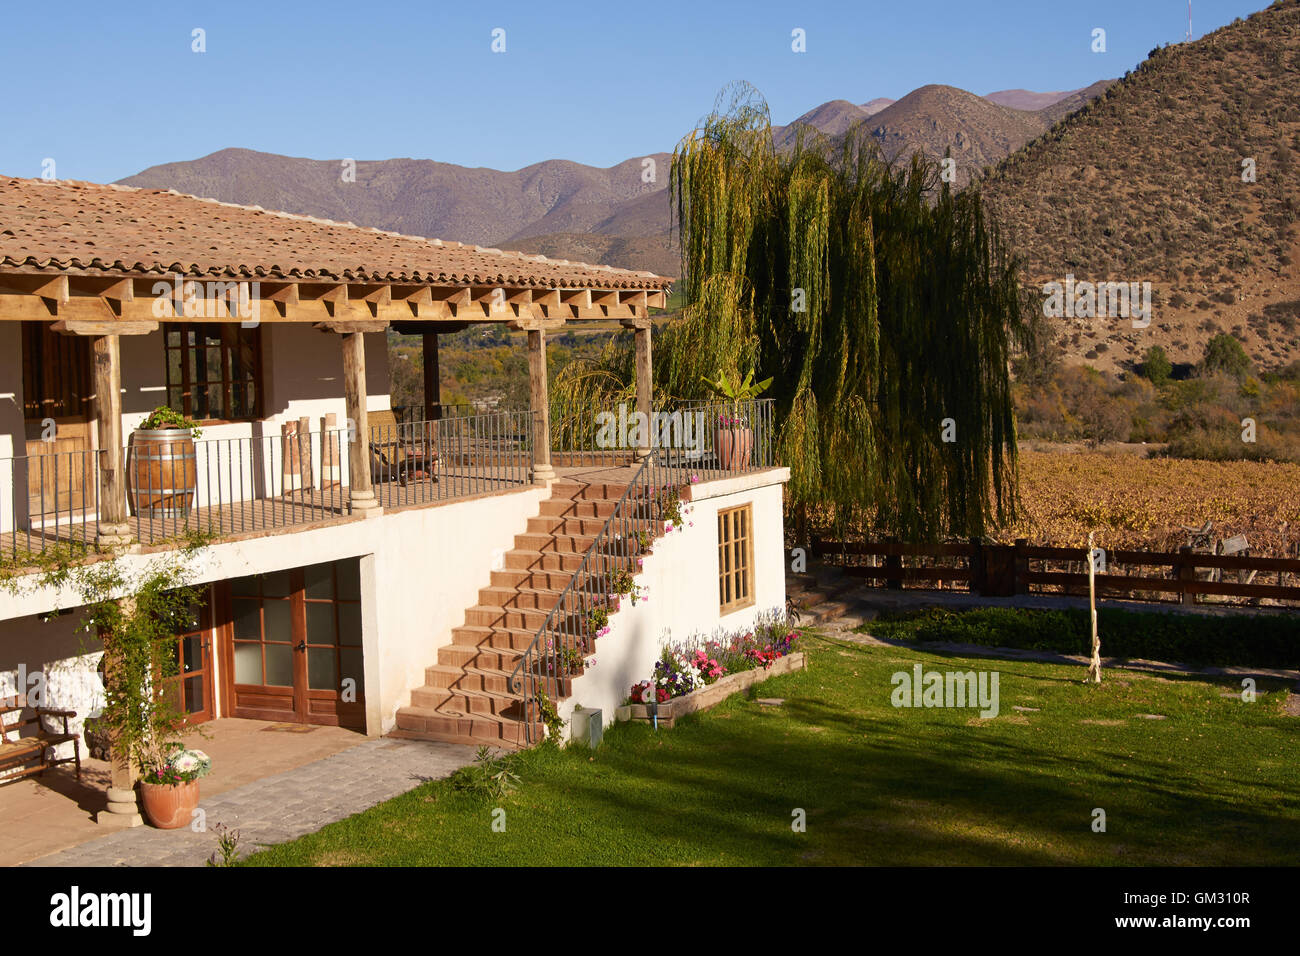 Spanish style architecture of the historic Hacienda Juntas in the Limari Valley of central Chile Stock Photo